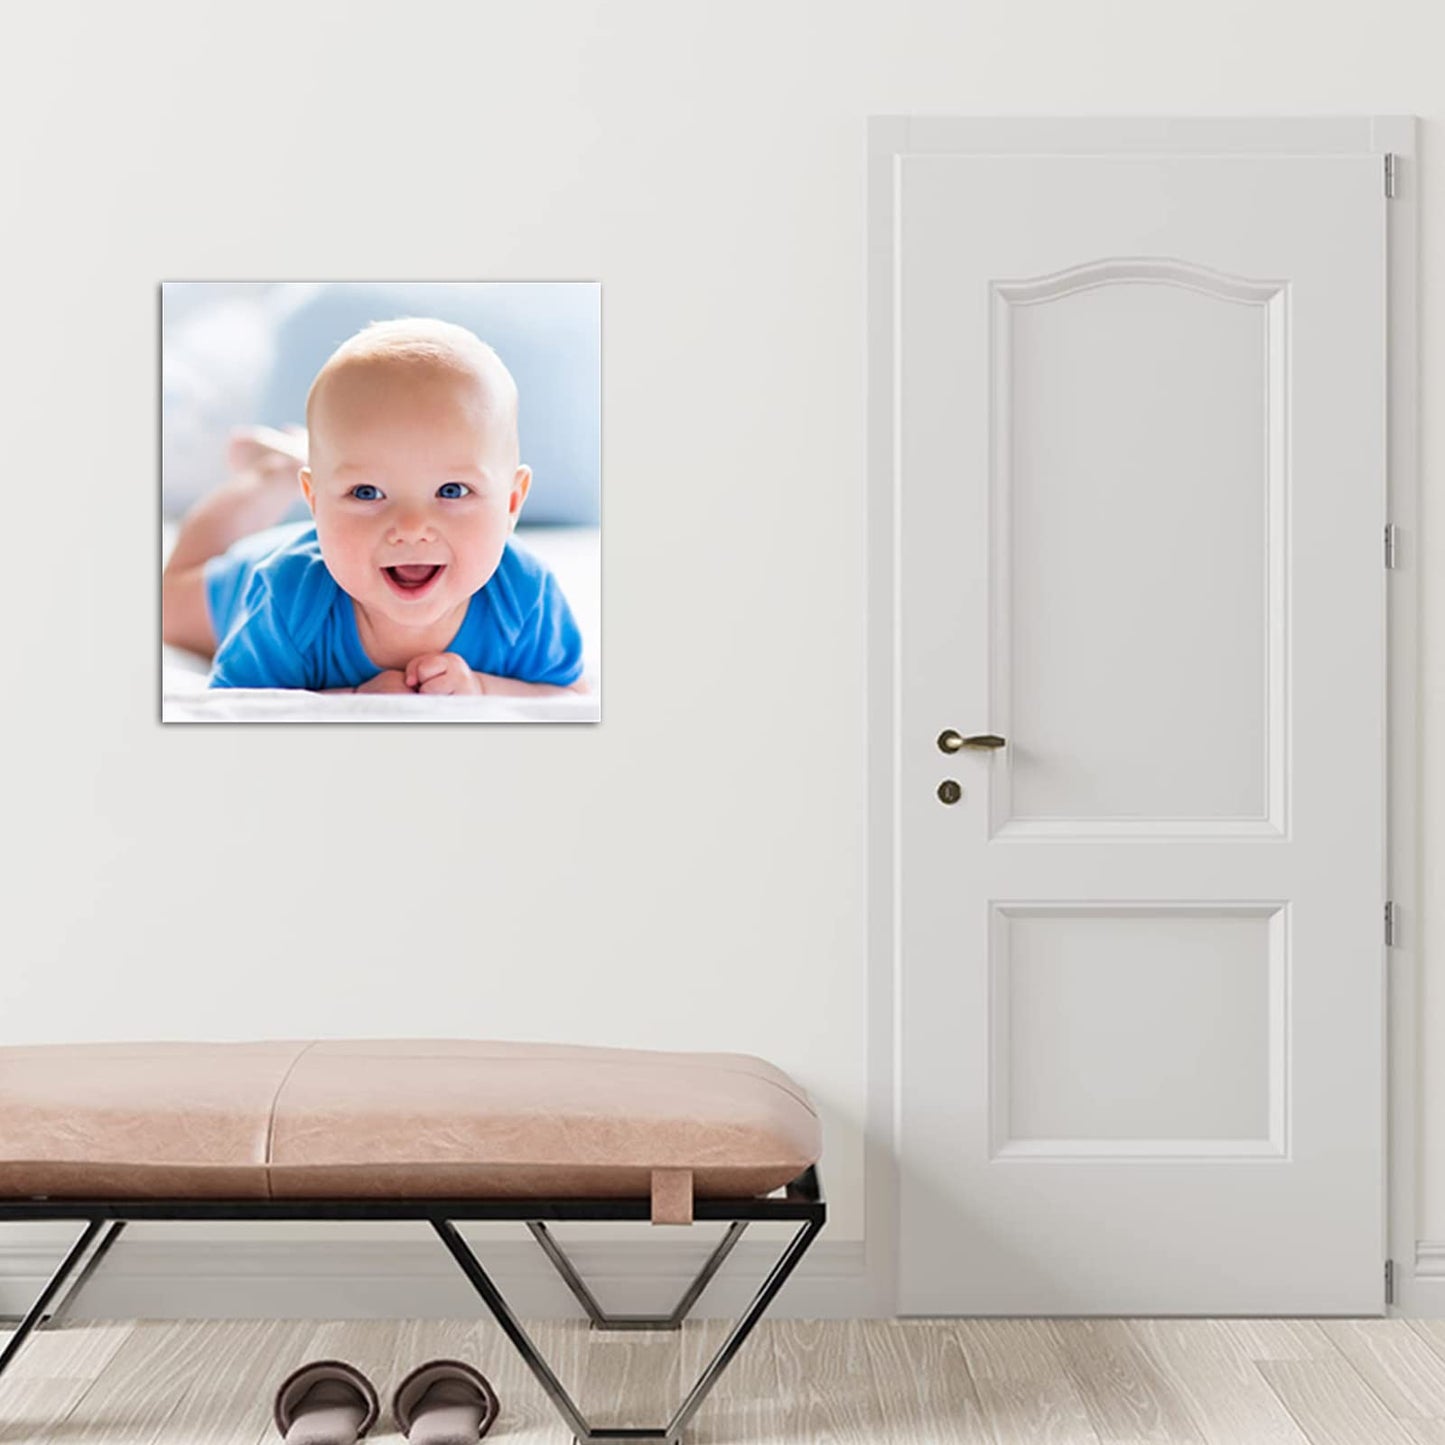 QIXIANG Custom Canvas Prints Baby Photo Frame 8"x8" Personalized Customized Family Picture Poster for Room Decor Ready to Hang (8"x8"(20x20cm) Frame)